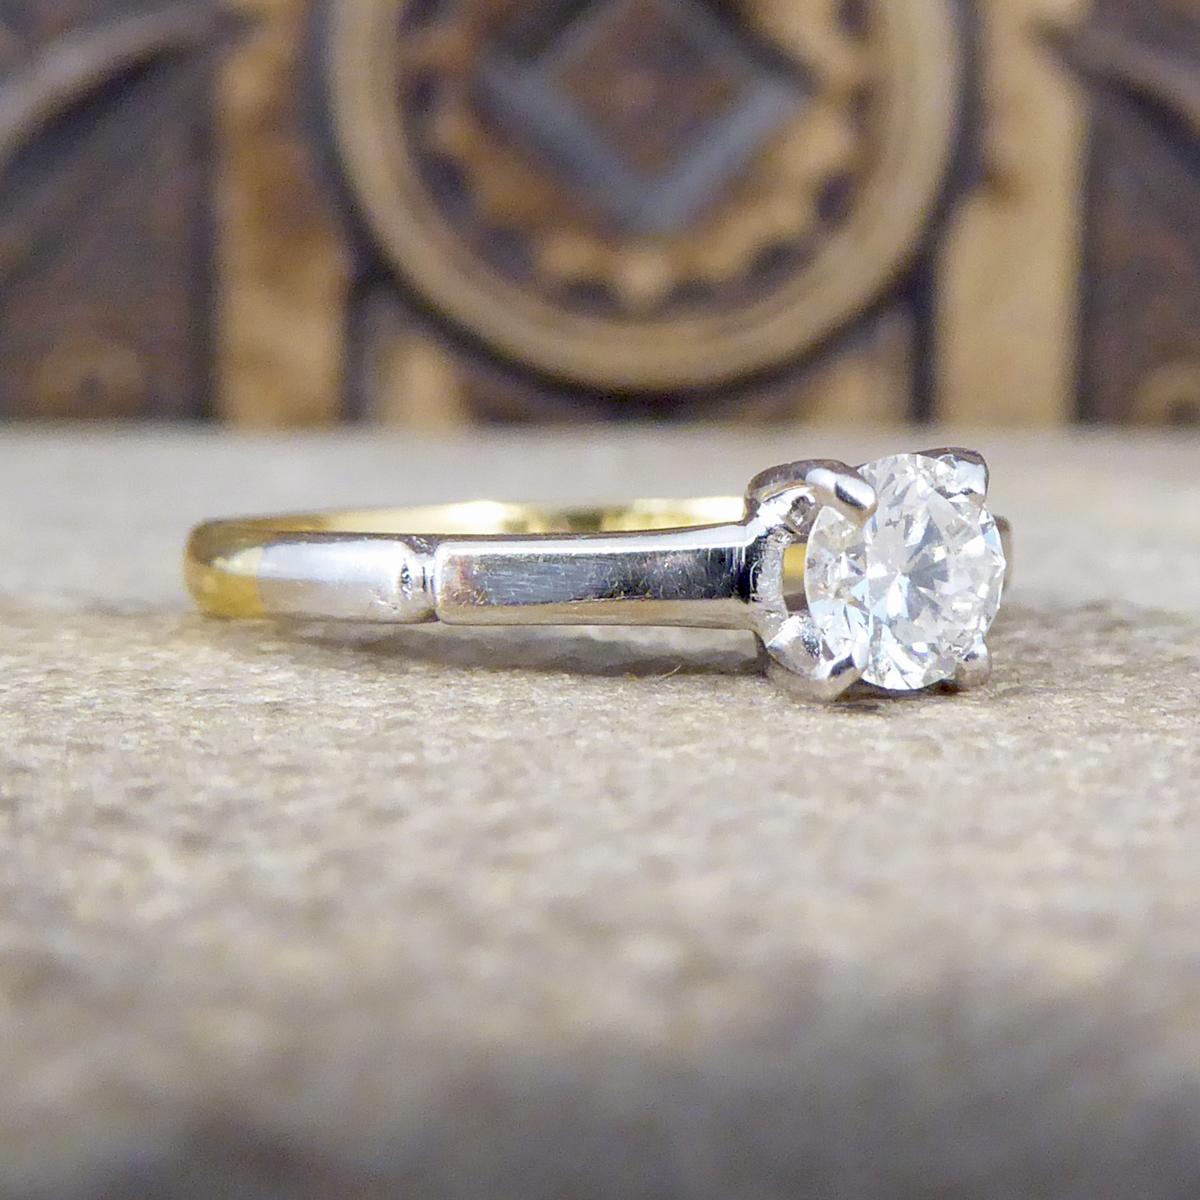 Featuring in this vintage ring is a clear and bright 0.35ct Round Cut Diamond in a White Gold four claw setting and plain shoulder leading down to a 18ct Yellow Gold plain band. This hand made ring is a true classic and would make the perfect